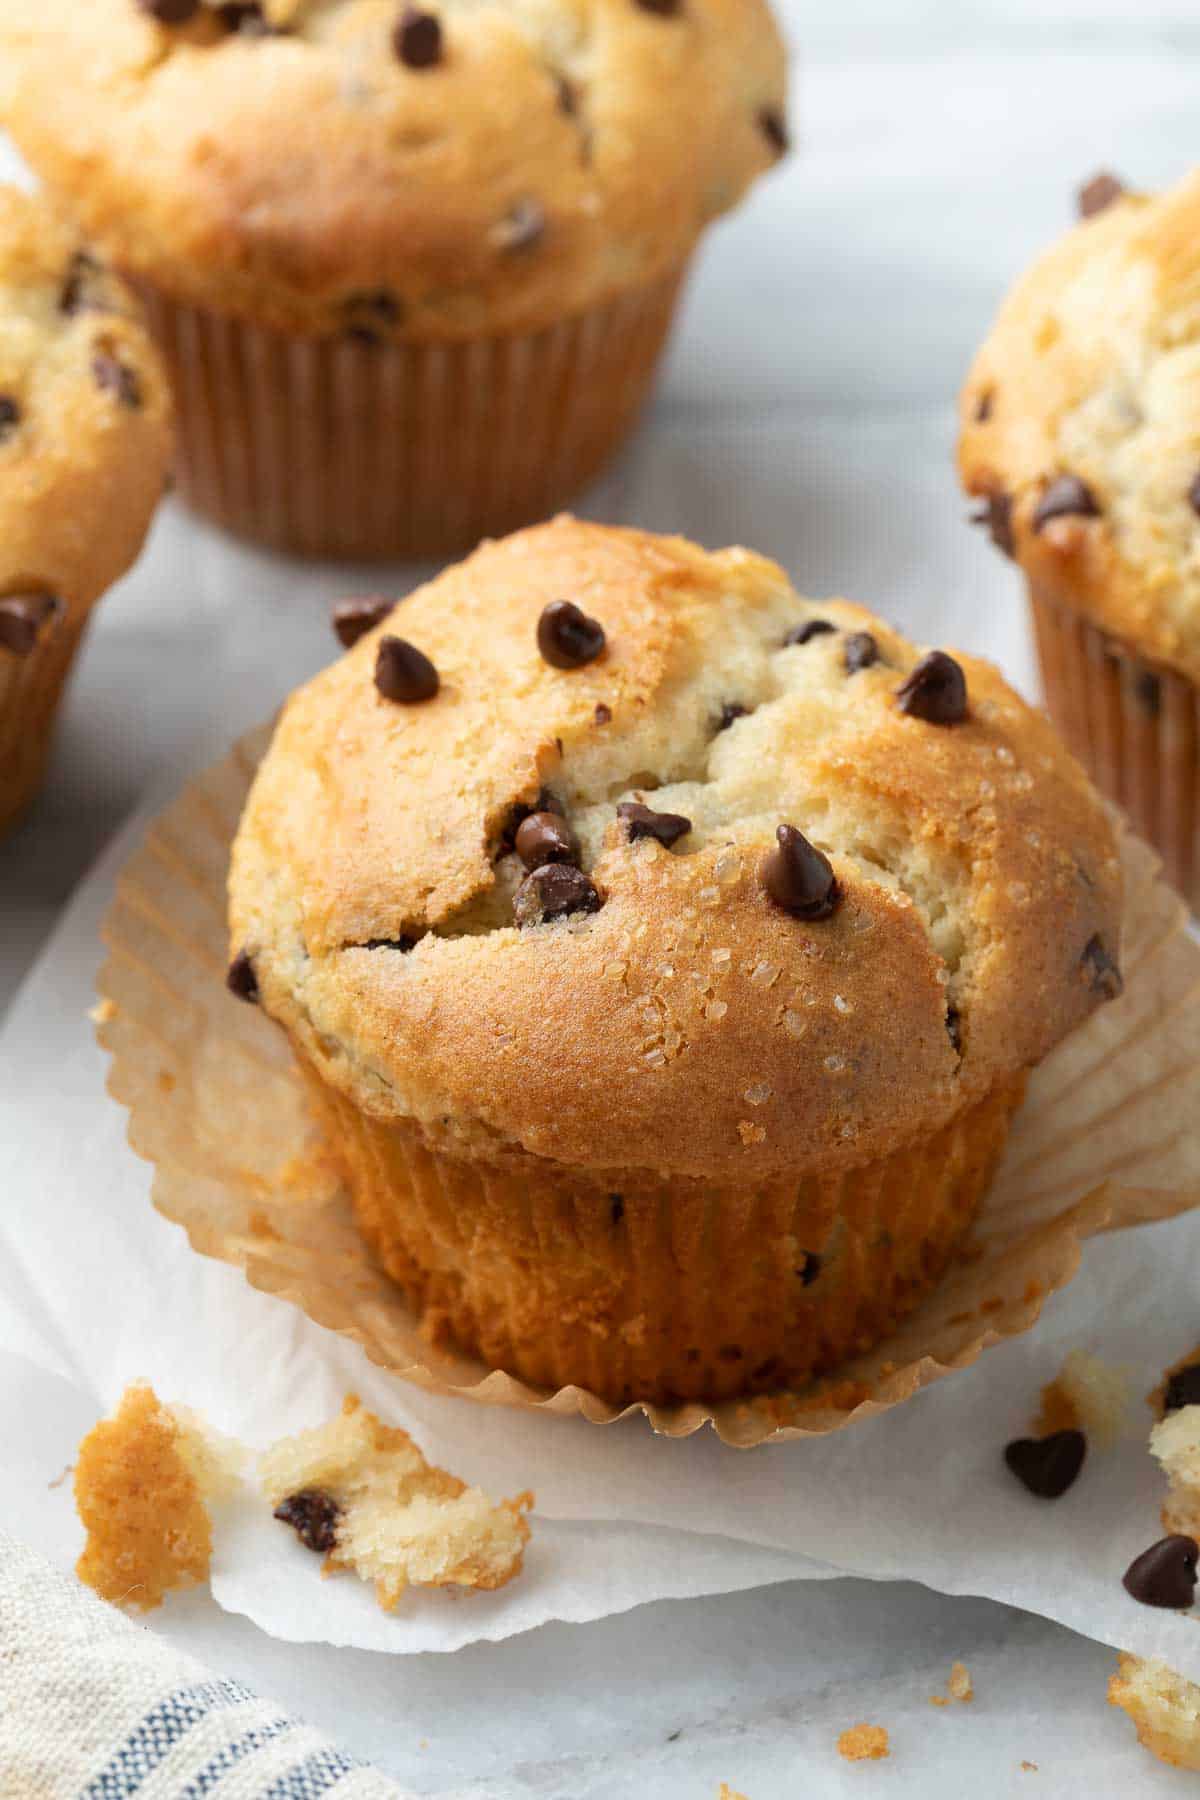 A gluten-free chocolate chip muffin on a counter